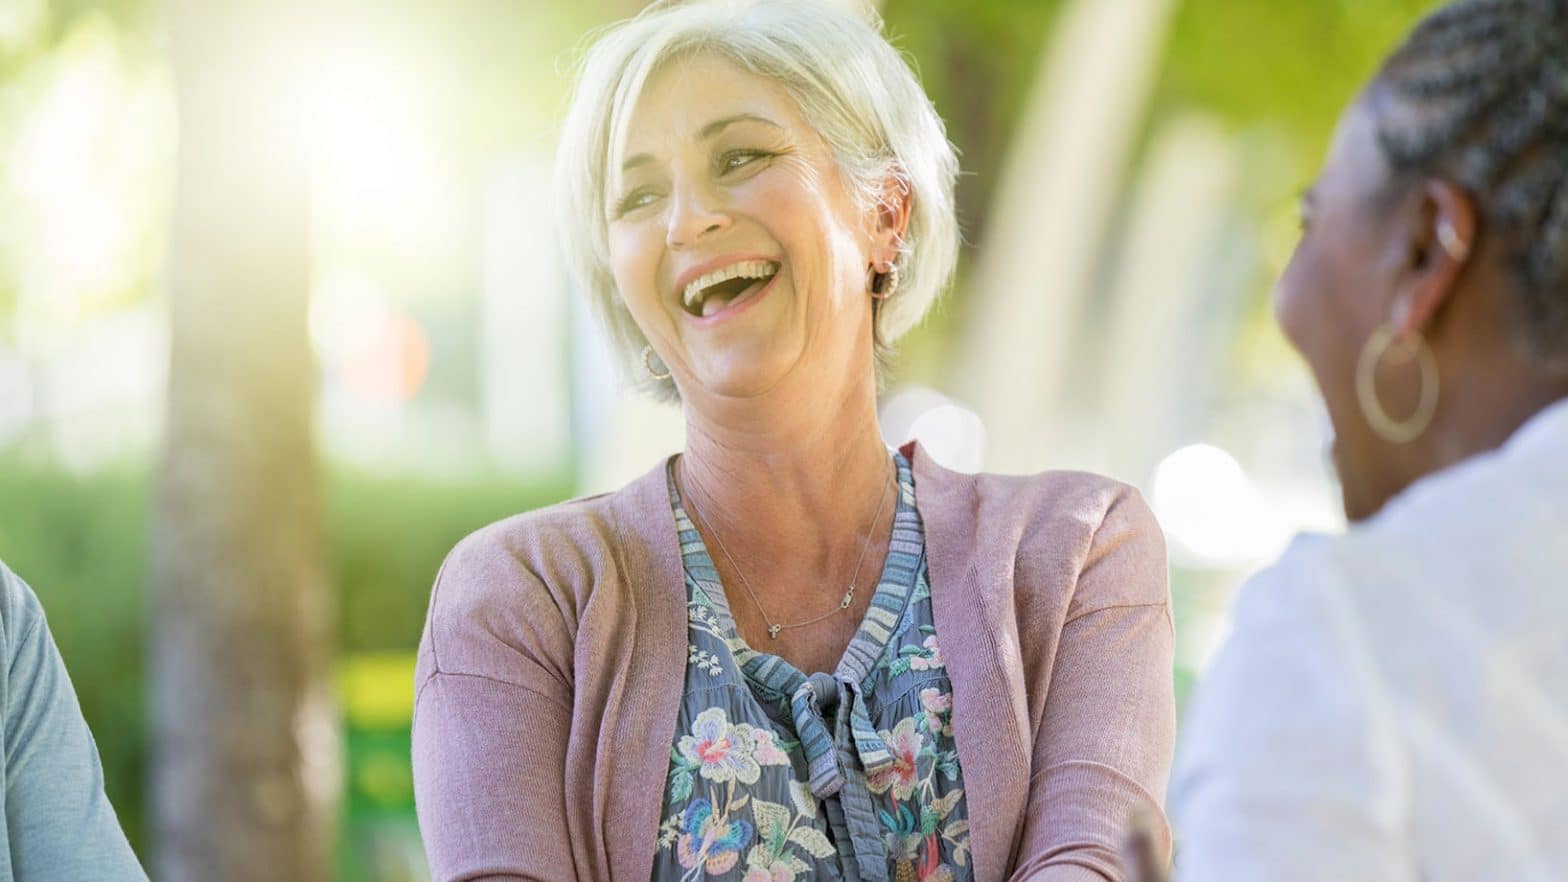 Laughing senior woman enjoys time with friends